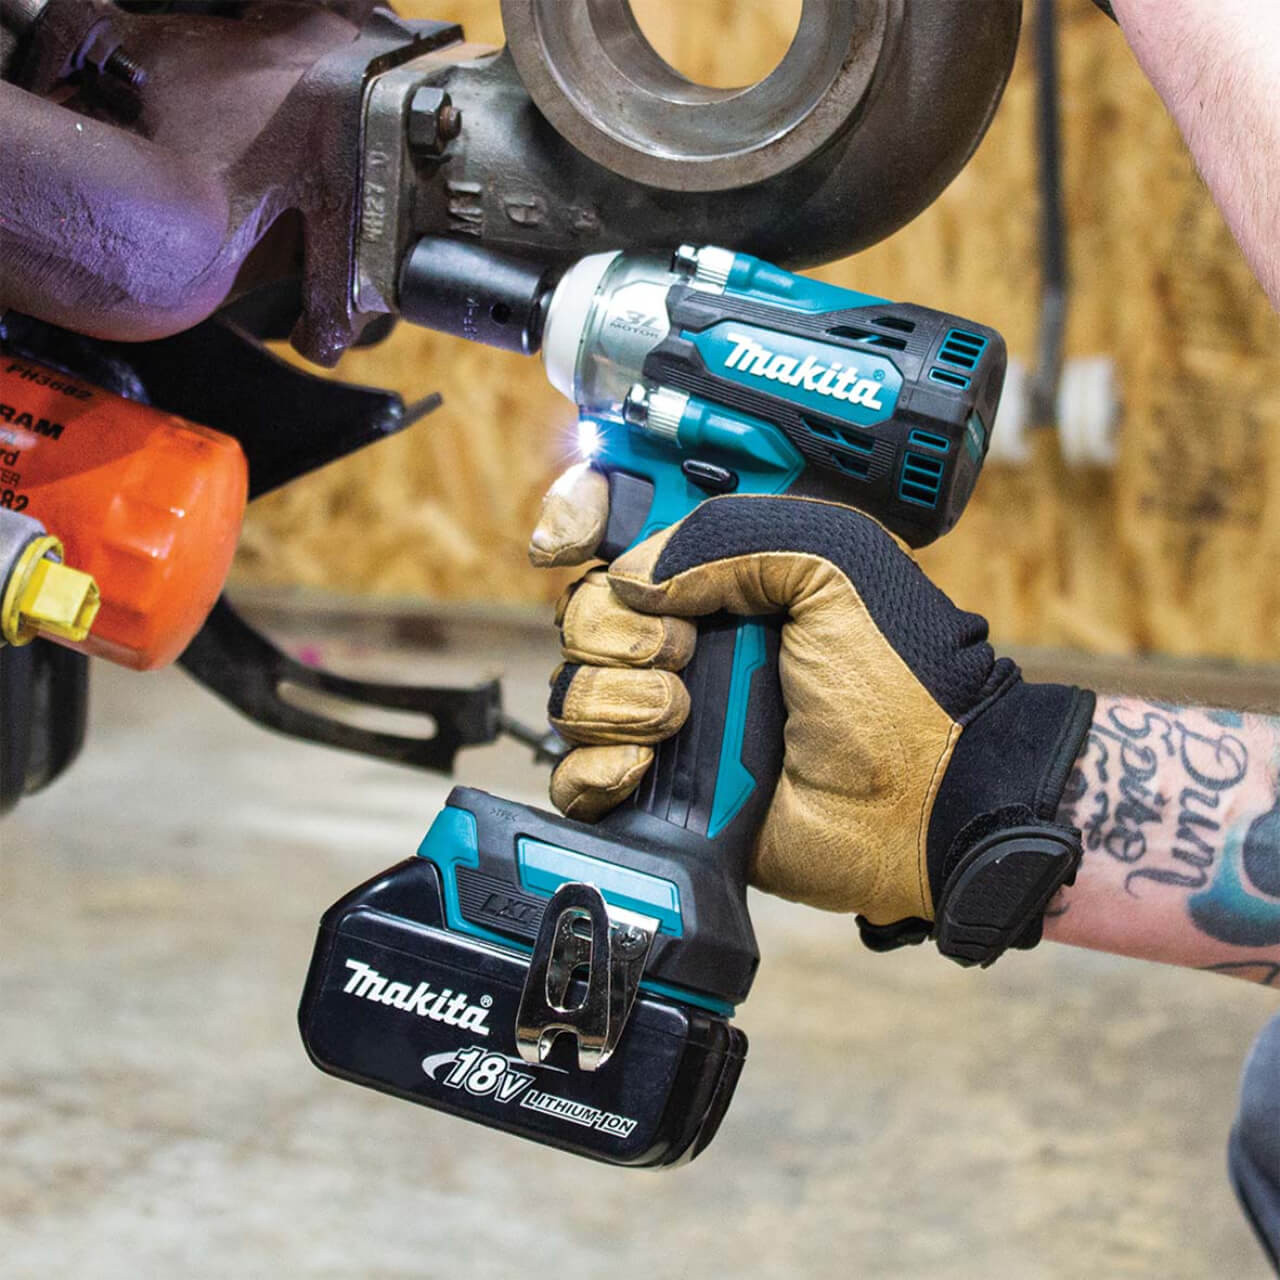 Makita DTW300RTJ 18V BRUSHLESS 1/2” Impact Wrench Kit - Includes 2 x 5.0Ah Batteries. Rapid Charger & Carry Case